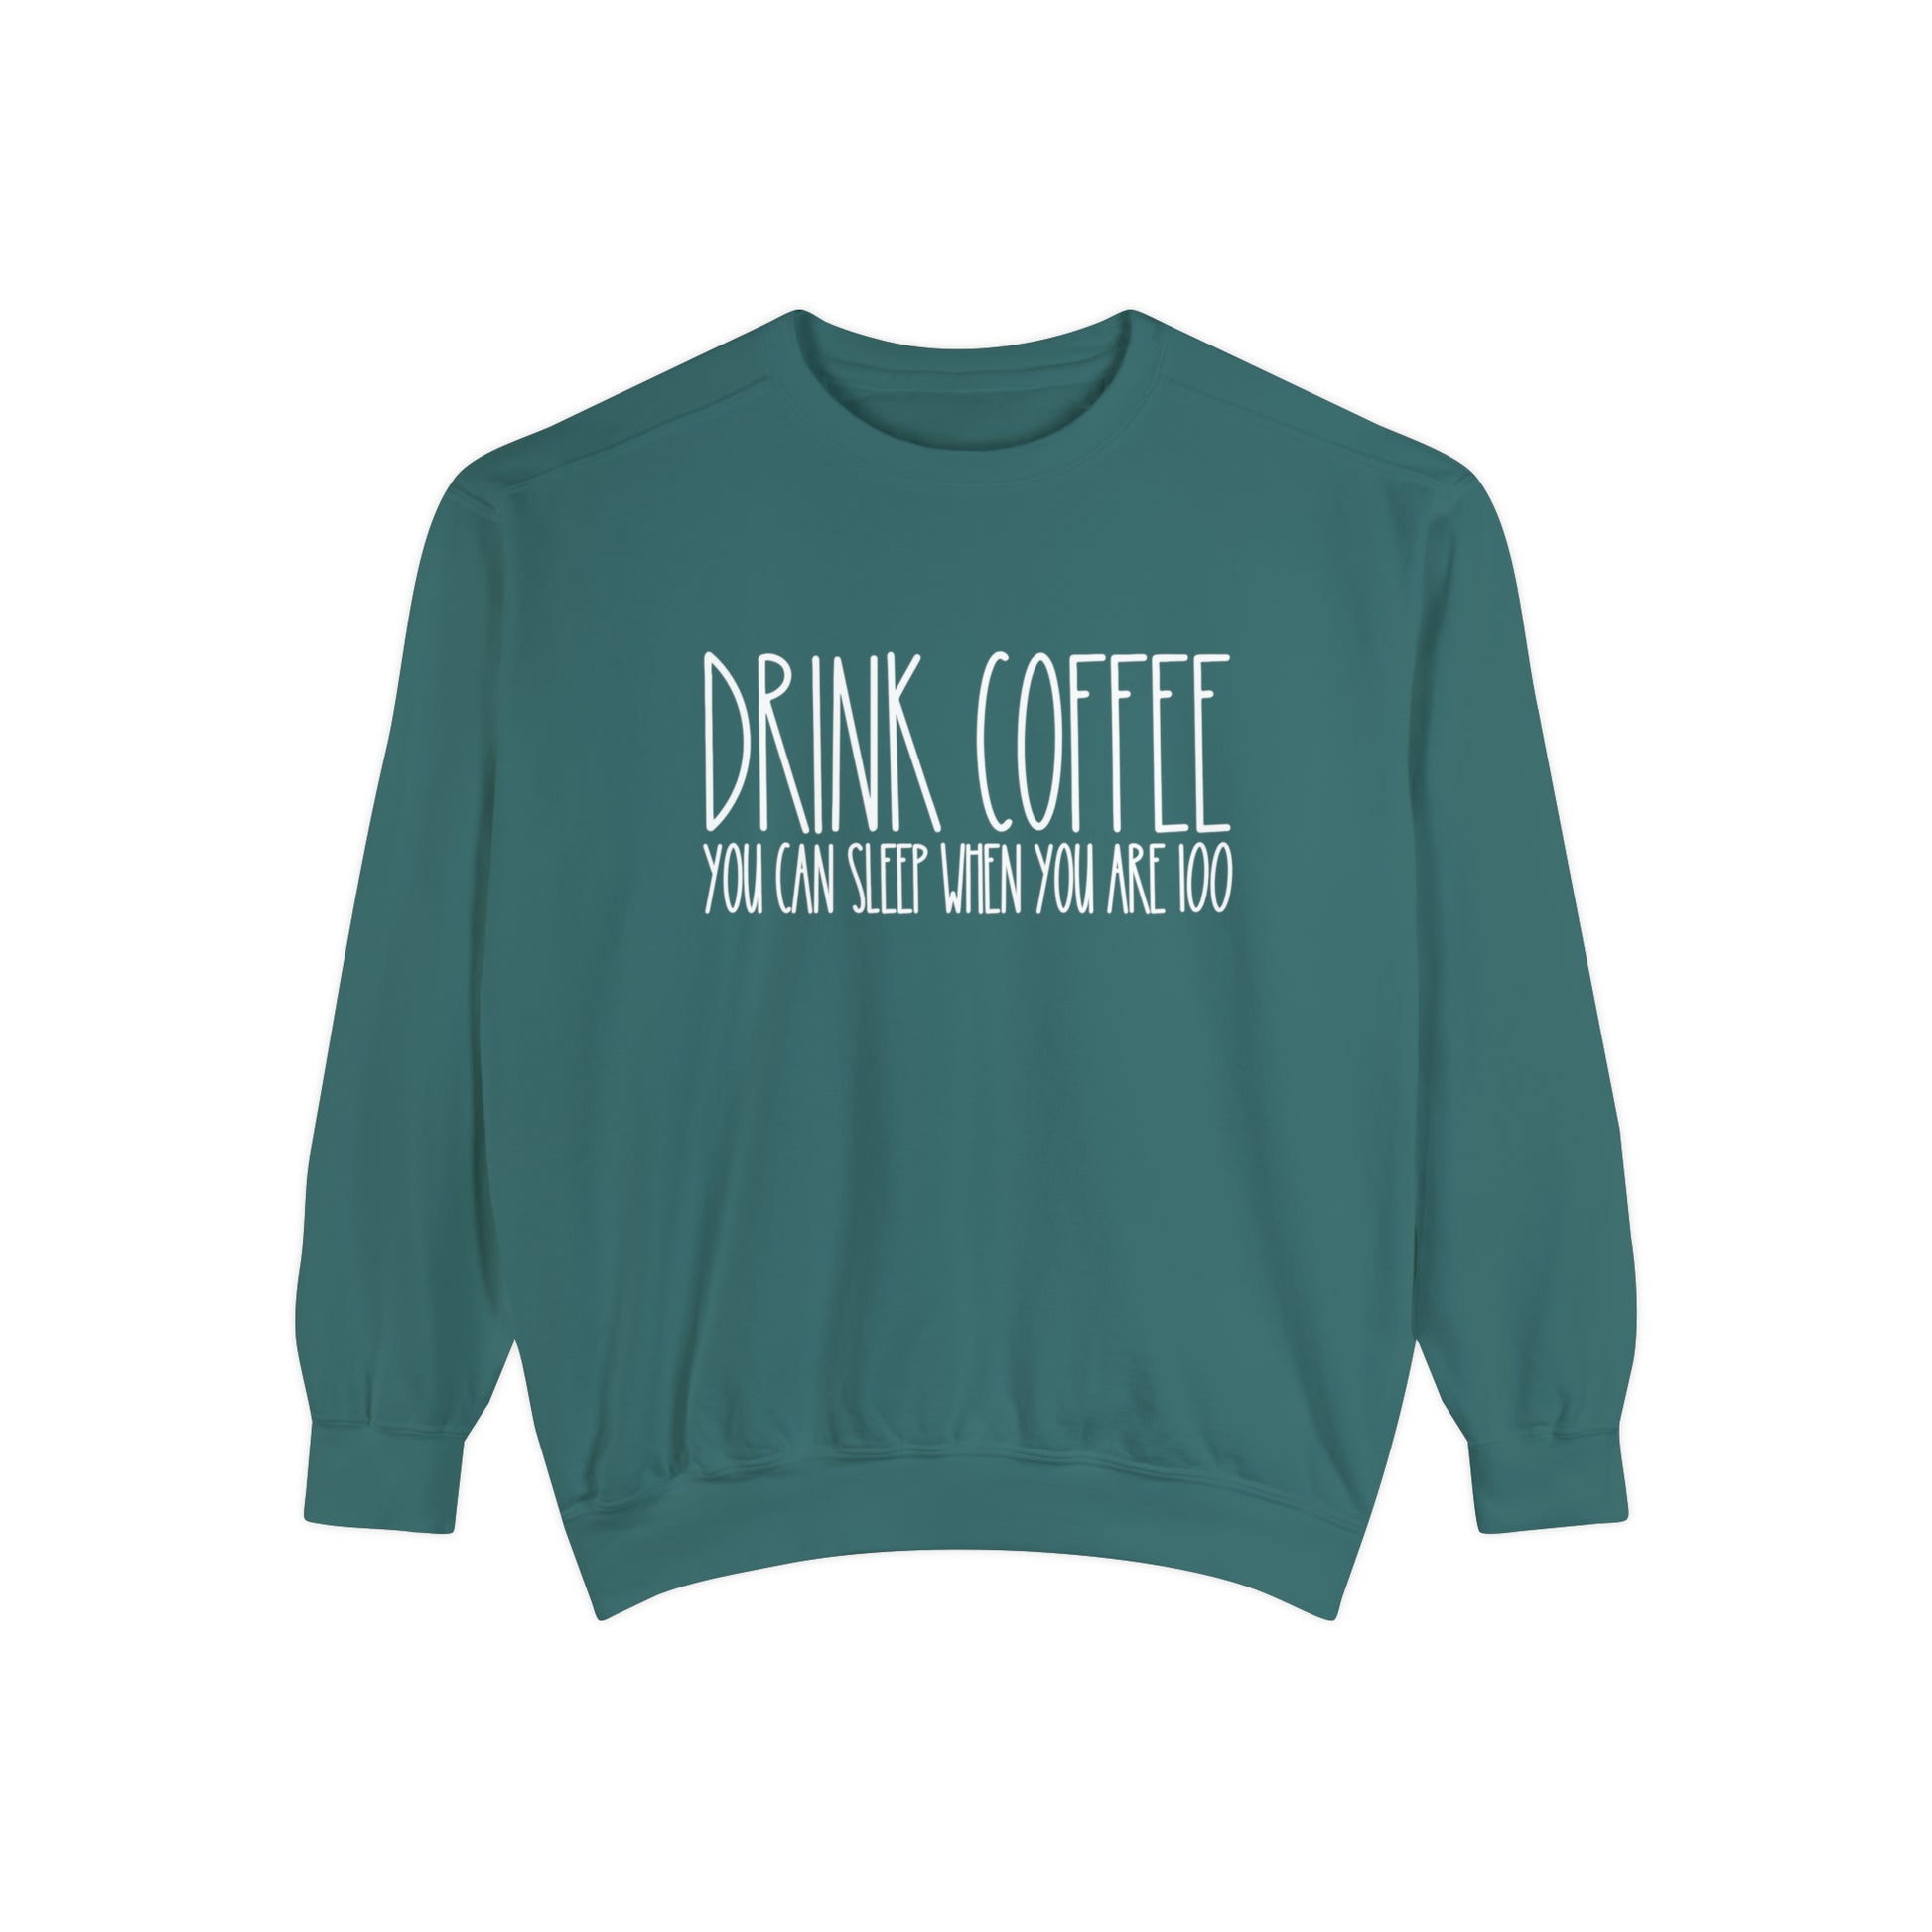 Drink Coffee: You Can Sleep When You're 100 - Women's Comfort Color Sweatshirt for Caffeine Enthusiasts - Eddy and Rita